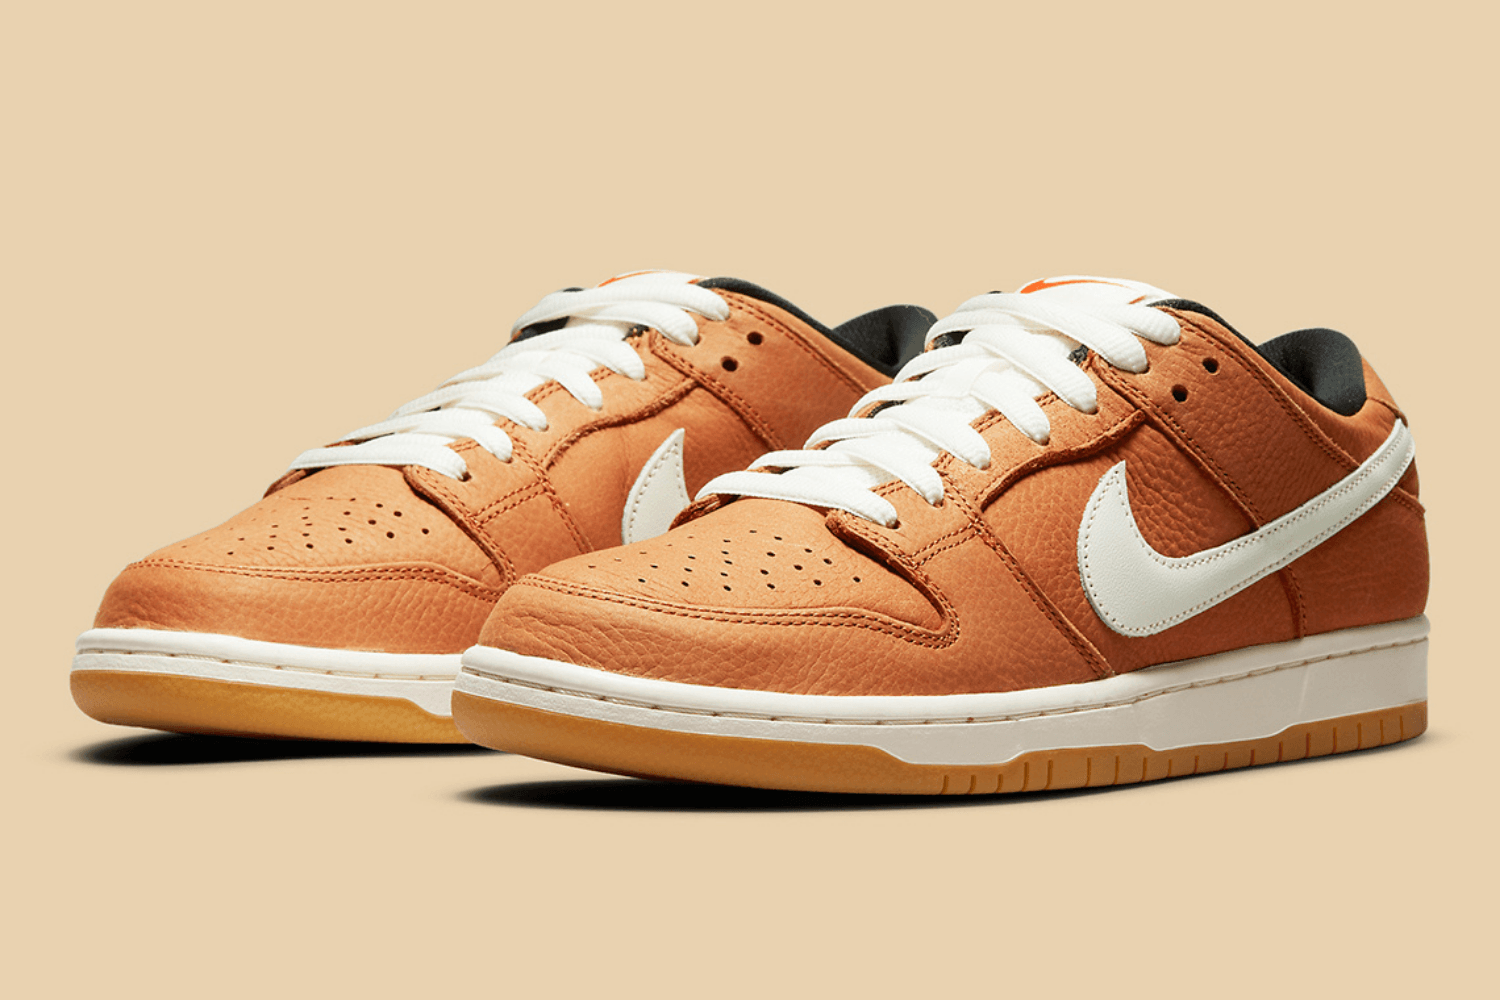 The Nike SB Dunk Low gets a 'Dark Russet' colorway